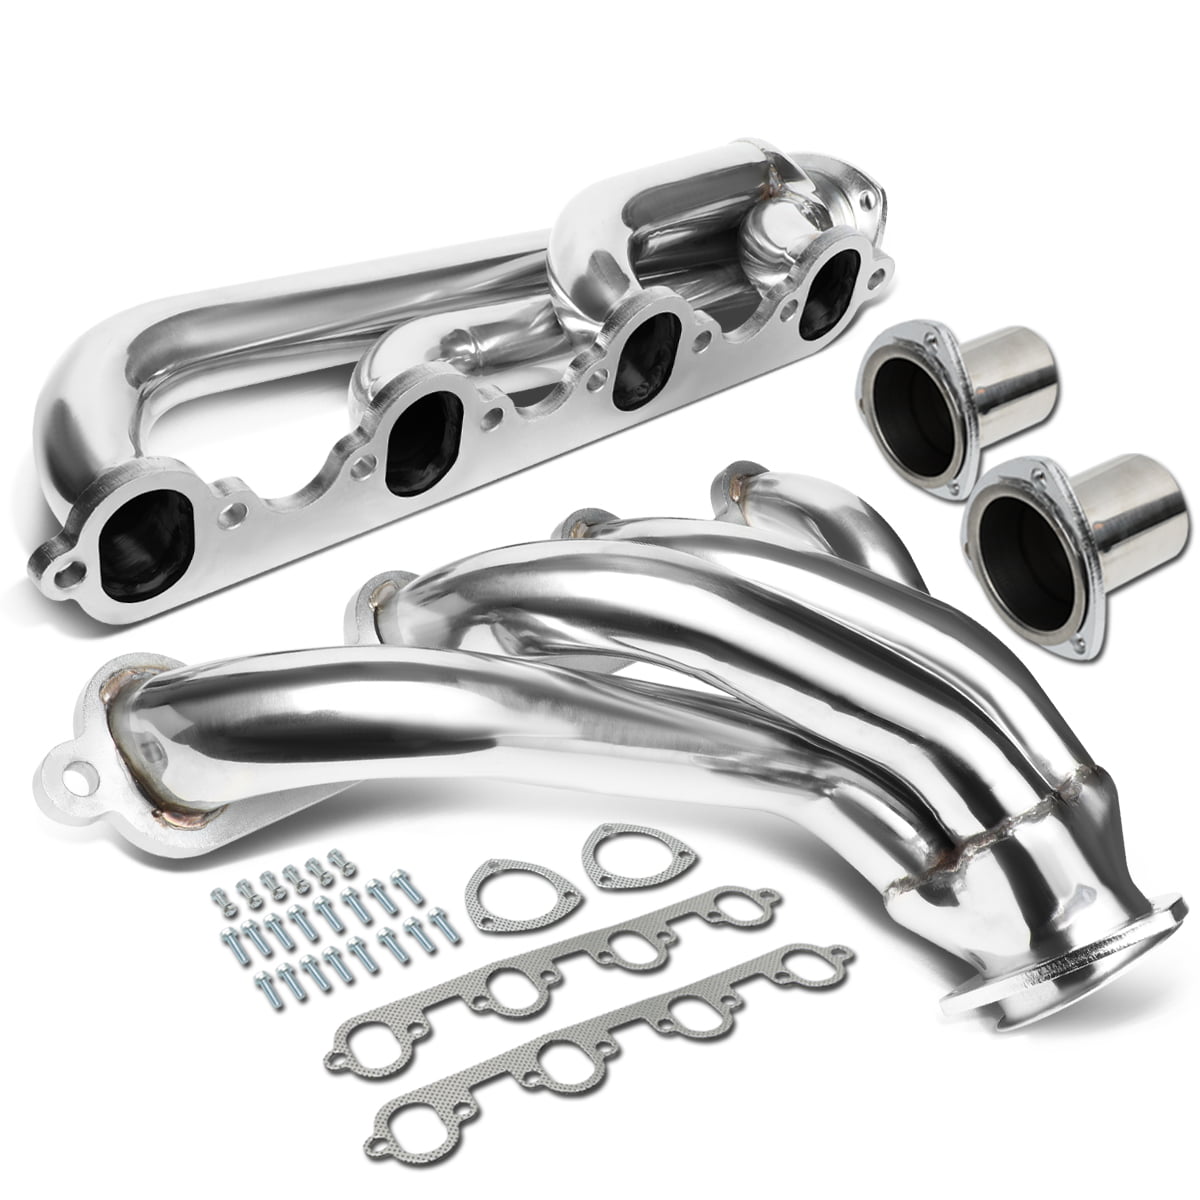 DNA MOTORING HDS-F15011-50L Stainless Steel Exhaust Header Manifold 